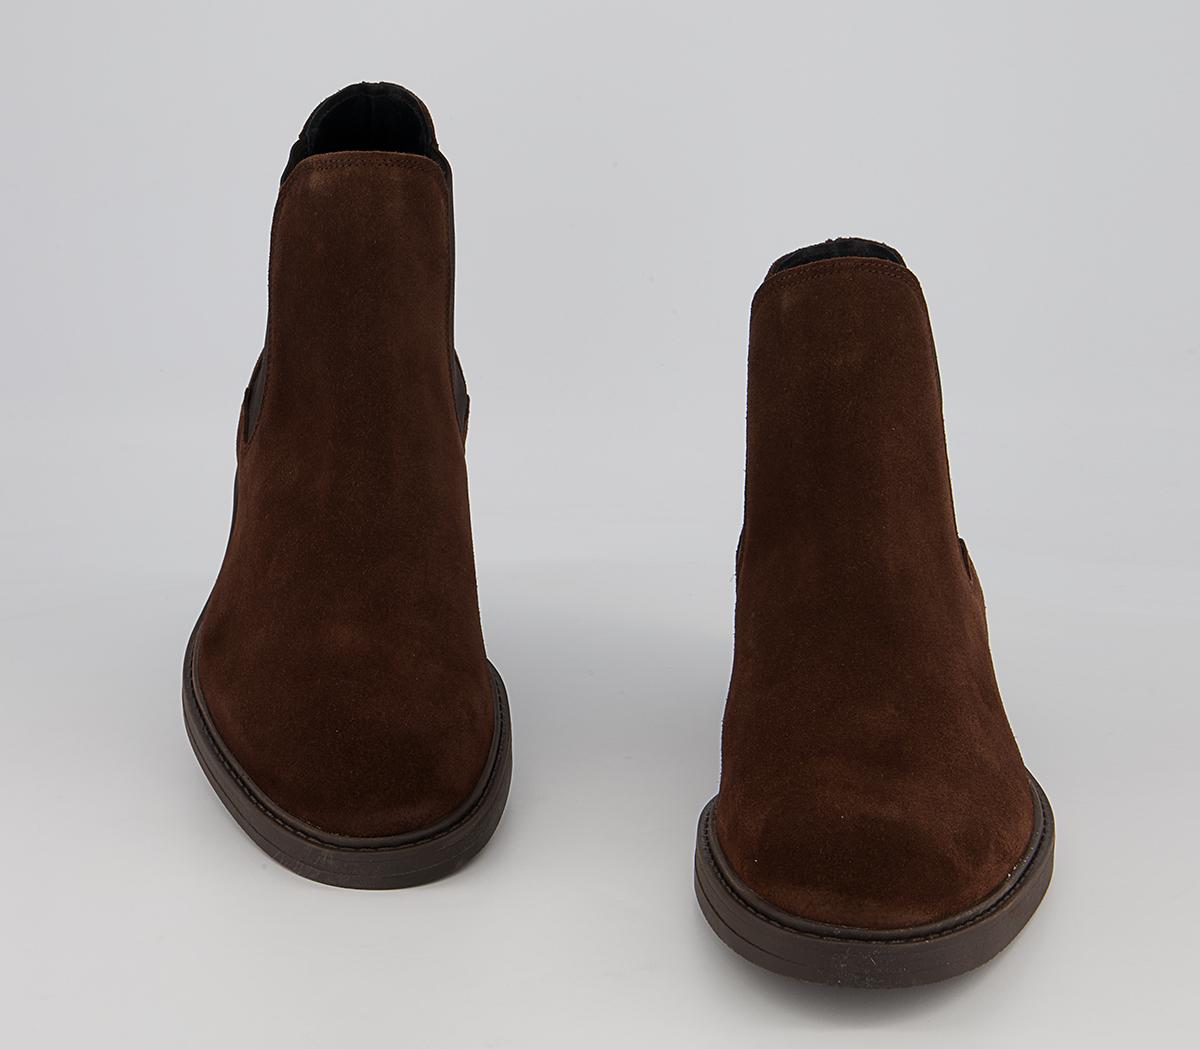 Selected Homme Blake Chelsea Boots Chocolate Brown Suede - Men’s Boots